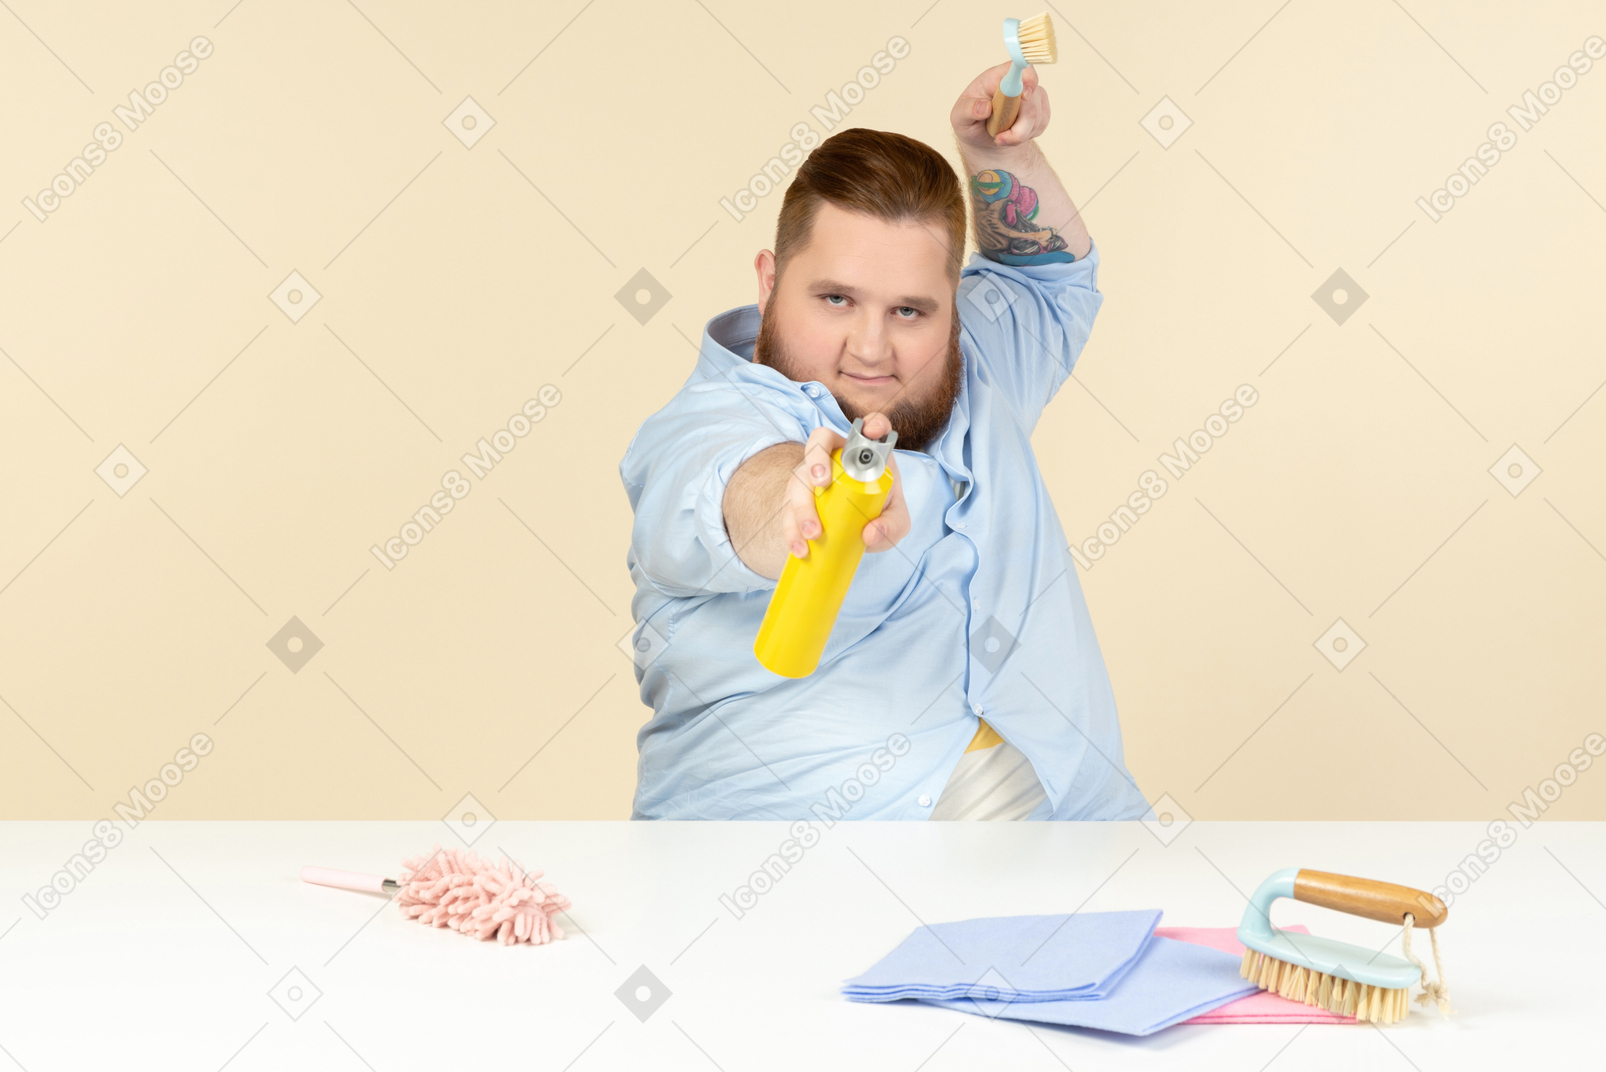 Young overweight man sitting at the table and holding cleaning equipment